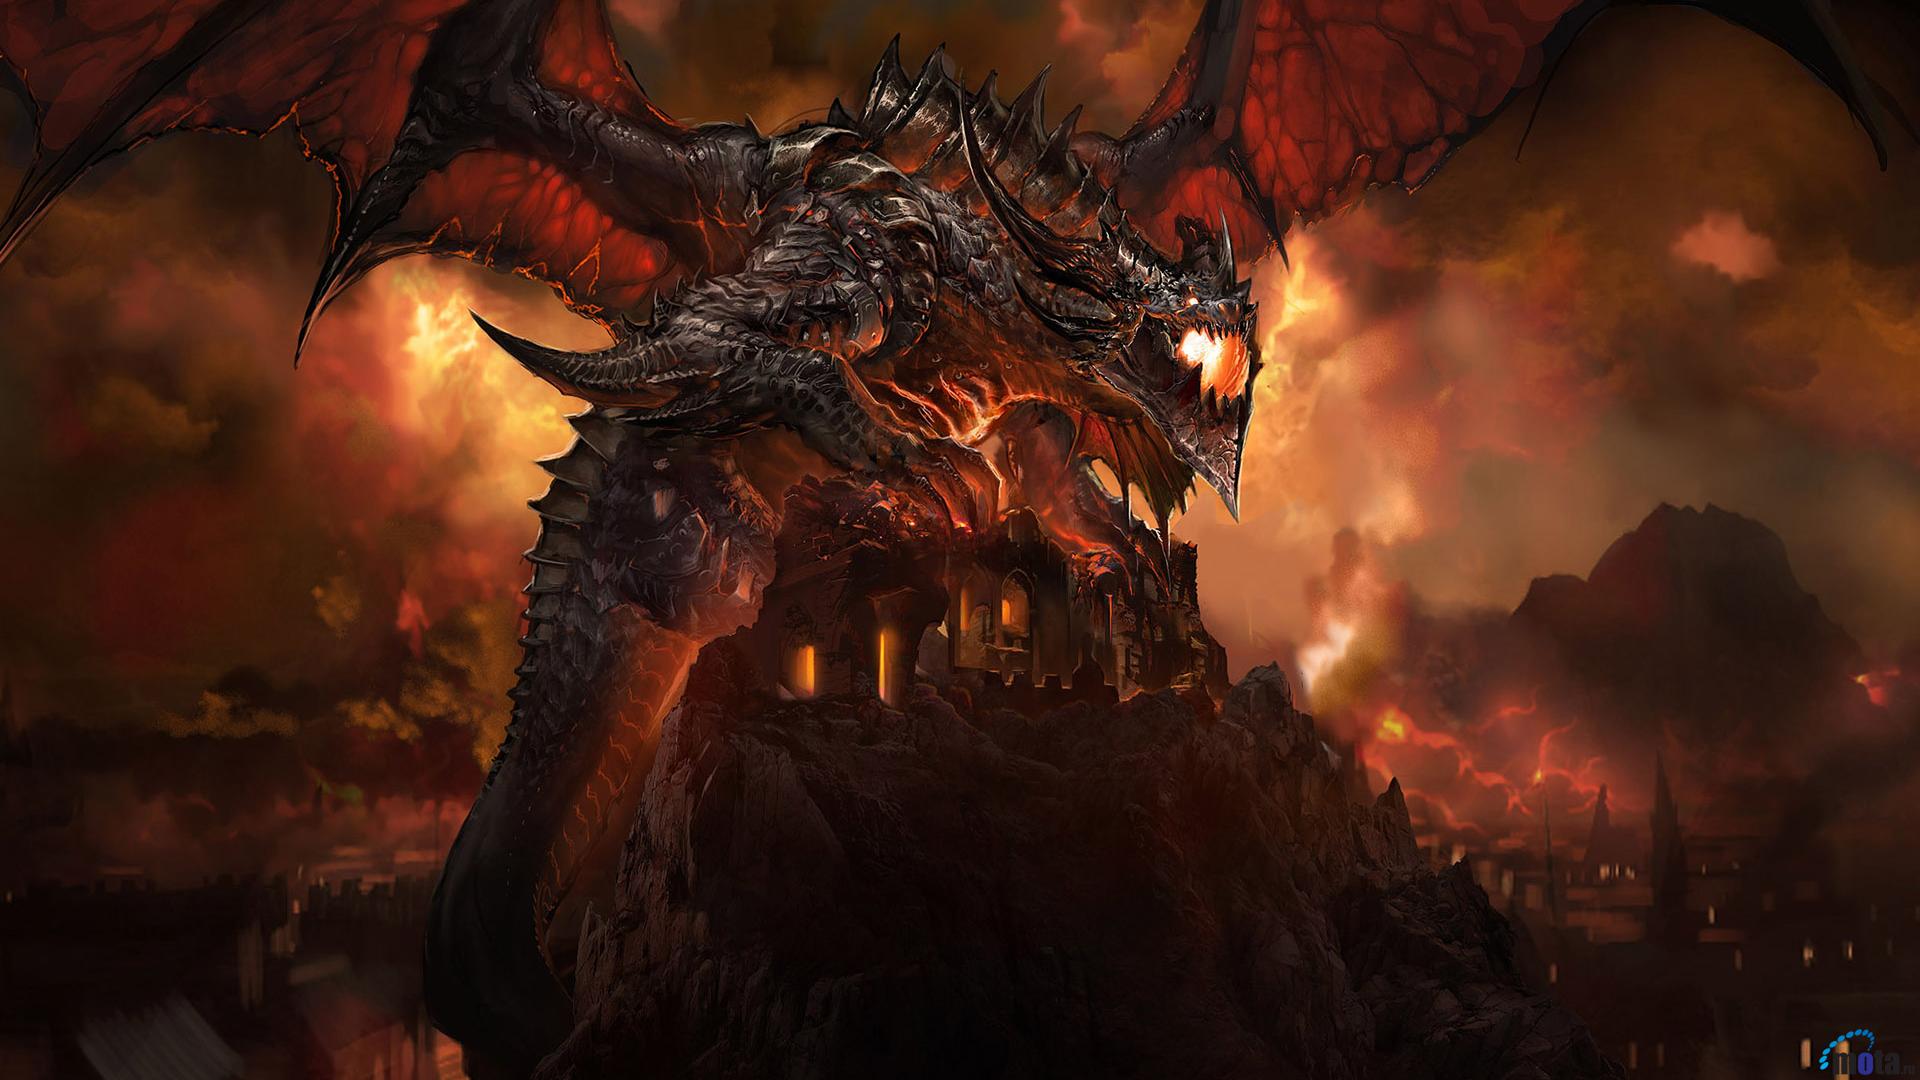 Download wallpaper Dragon from World of Warcraft Cataclysm